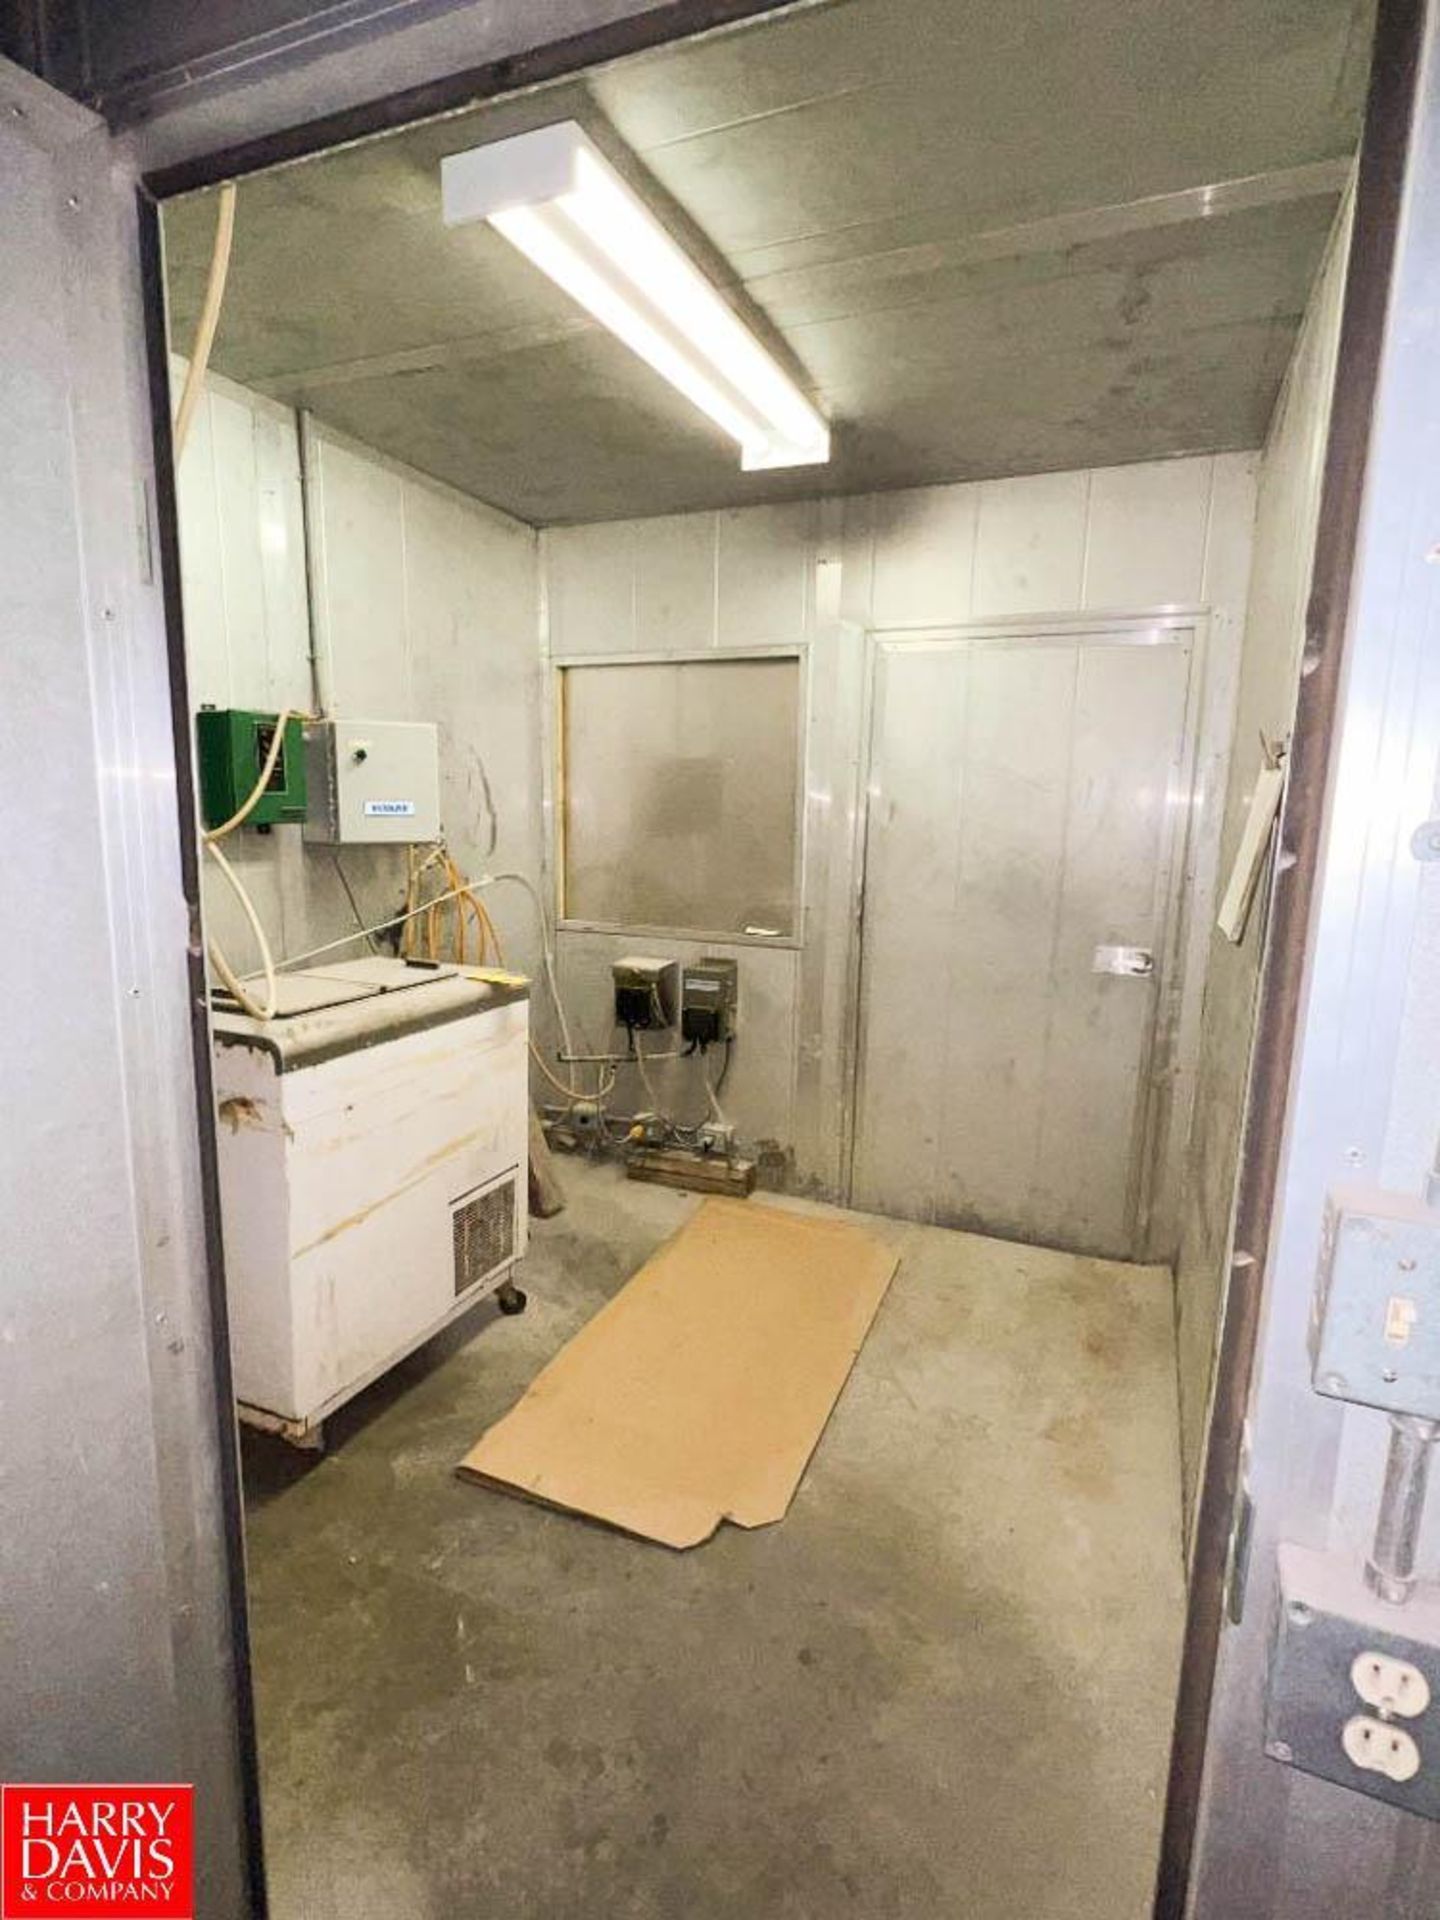 Walk-In Cooler with (2) Man-Doors, Dimensions = 8' Width x 8' Height x 7' Depth - Rigging Fee: $1850 - Image 2 of 2